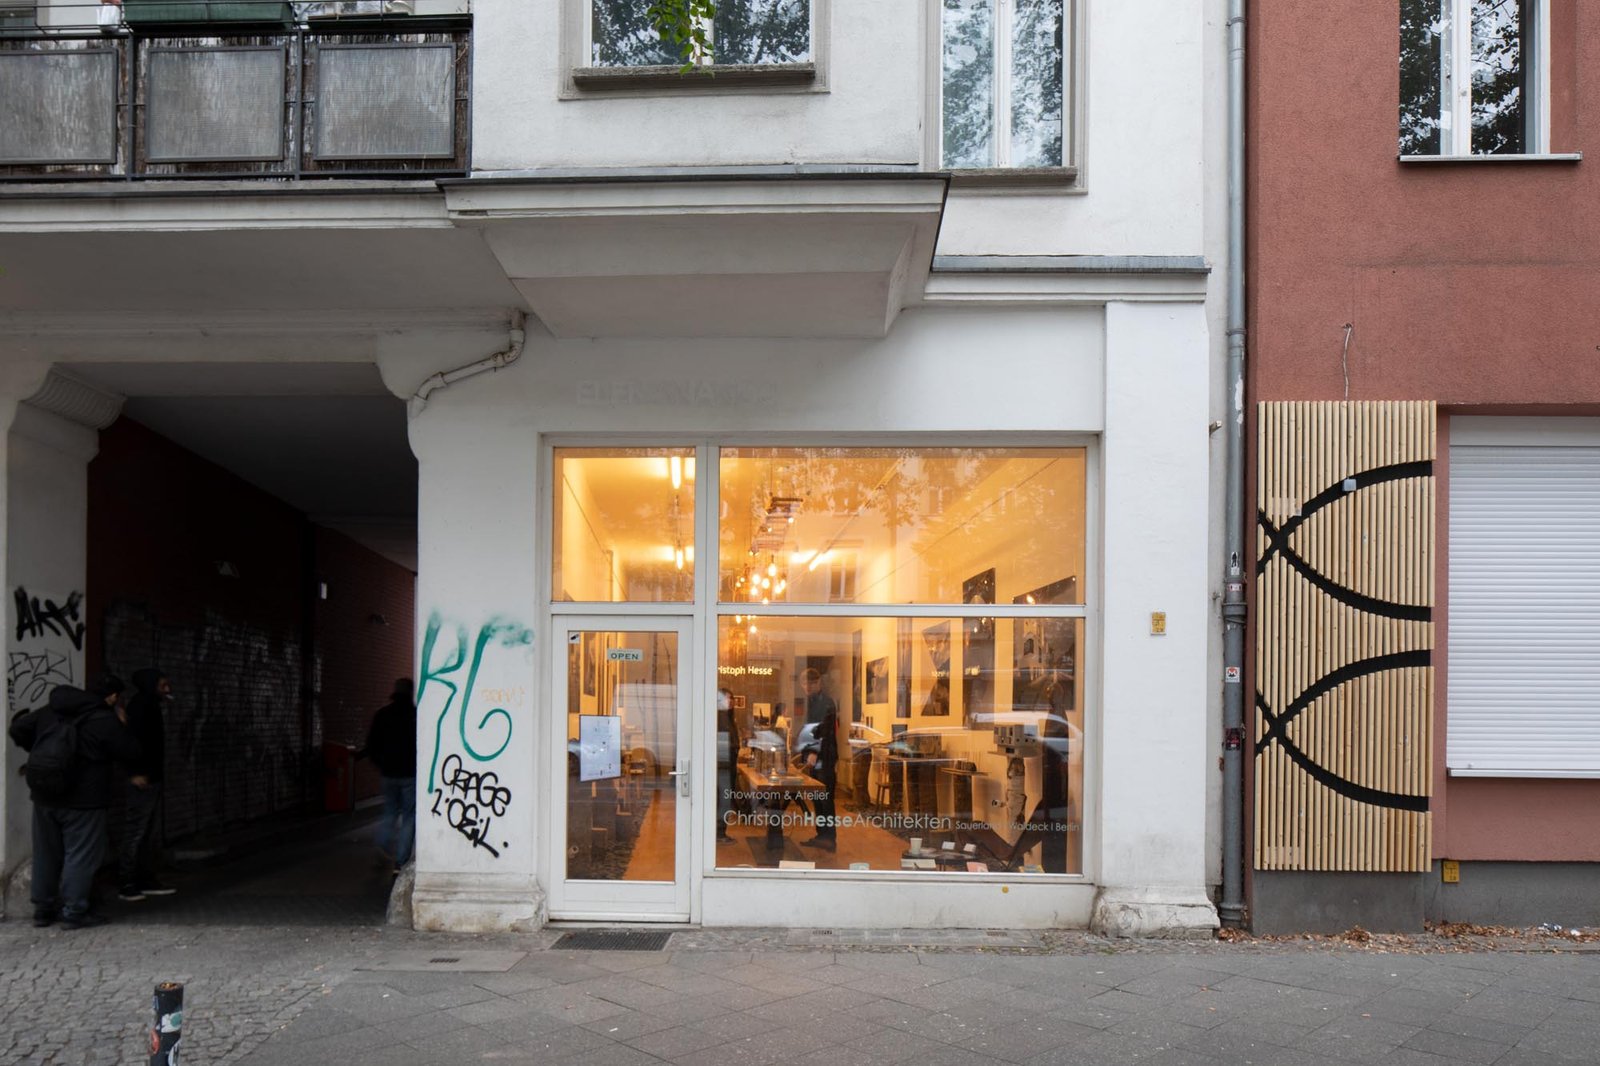 Studio Go to: A Dialog with Christoph Hesse Architects in Their Workspace in Berlin